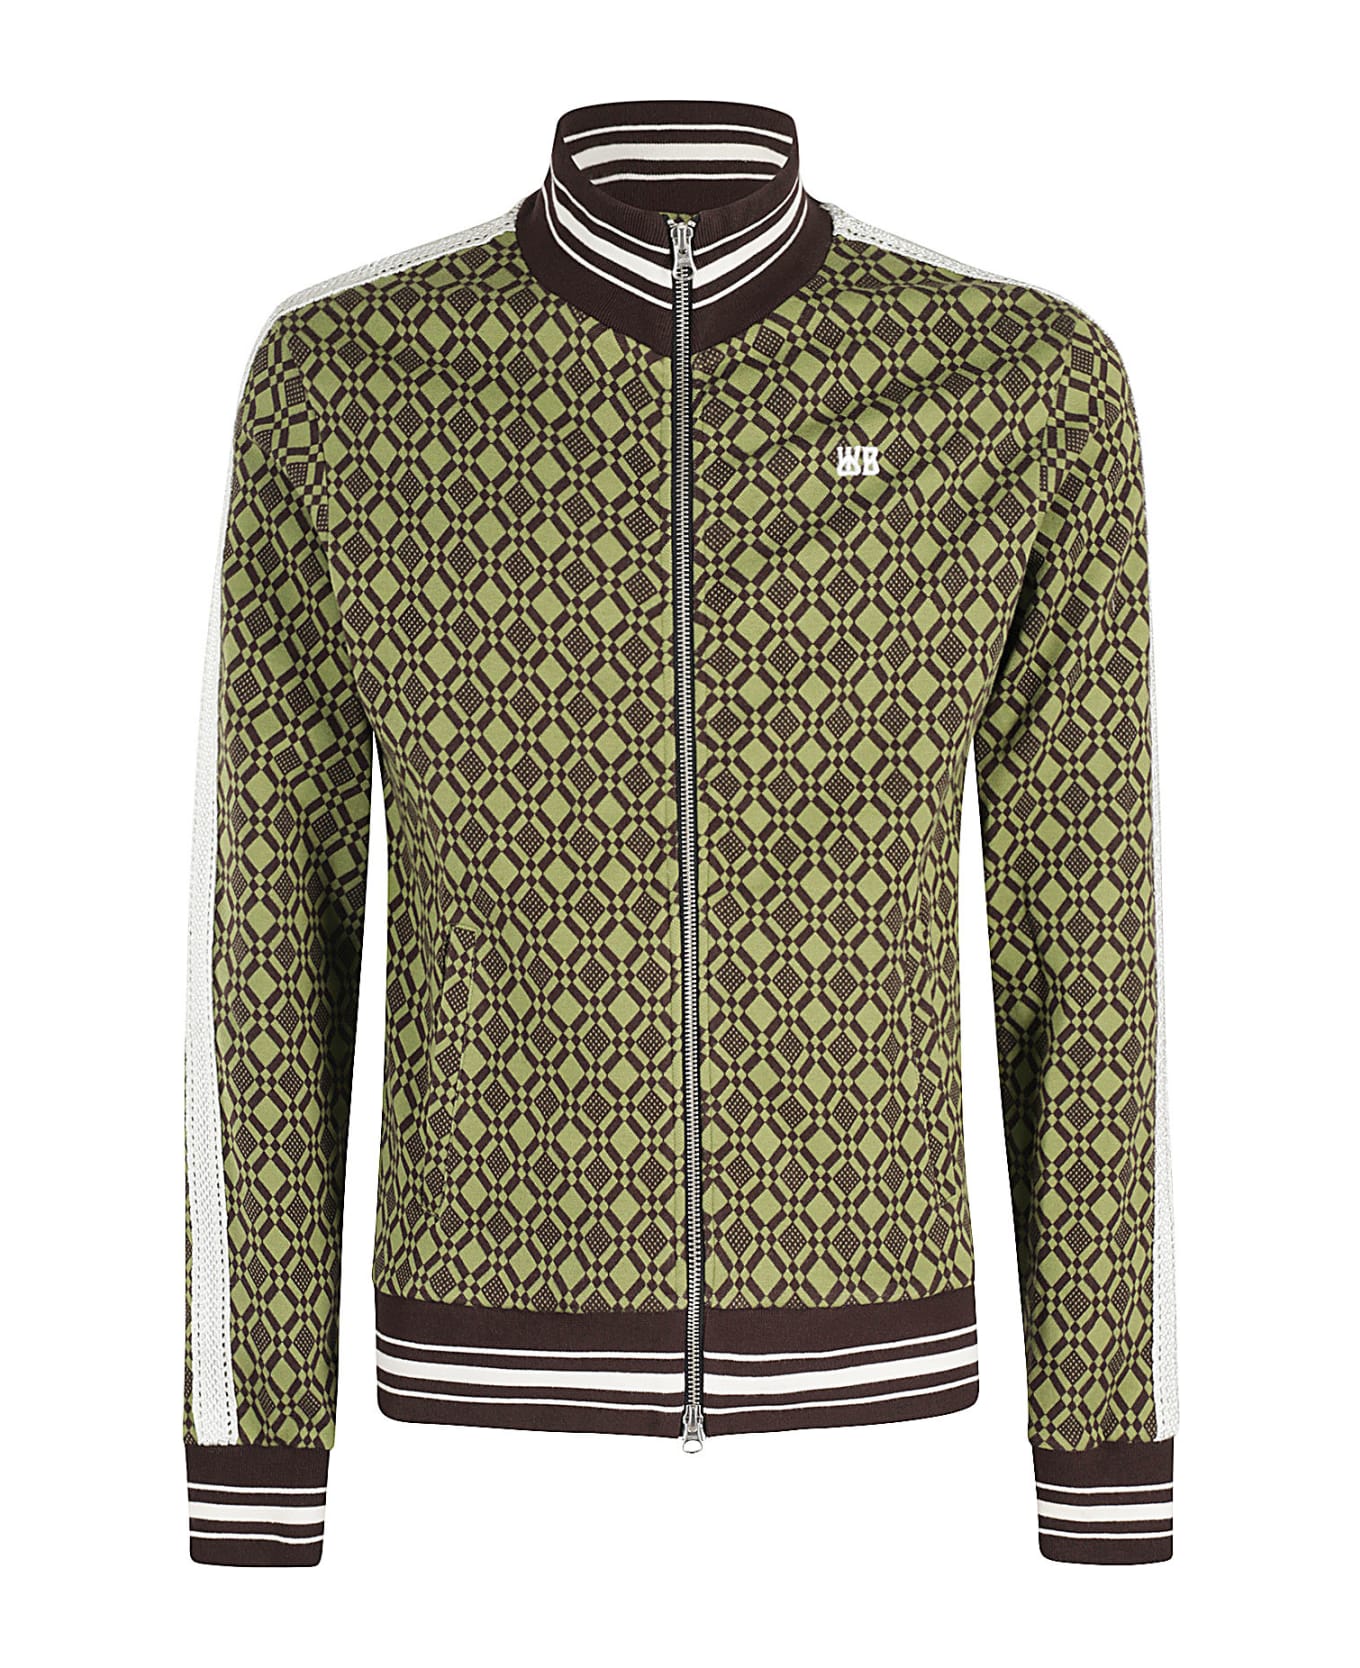 Wales Bonner Power Track Top - Olive And Dark Brown